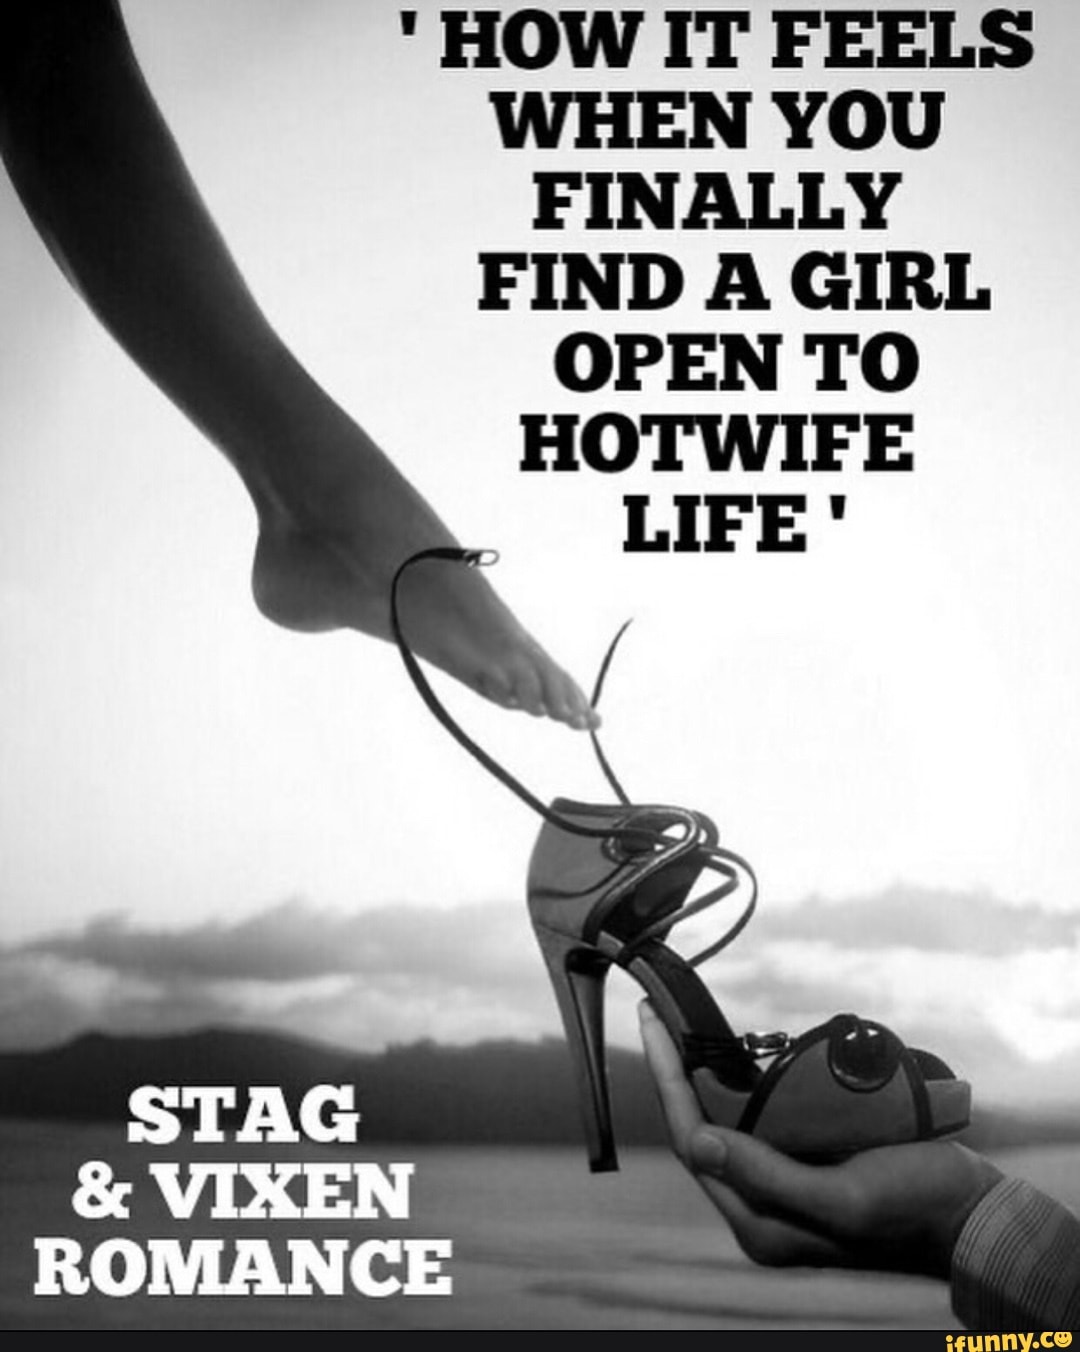 "how IT feels when you finally find a girl open to hotwife life stag v...